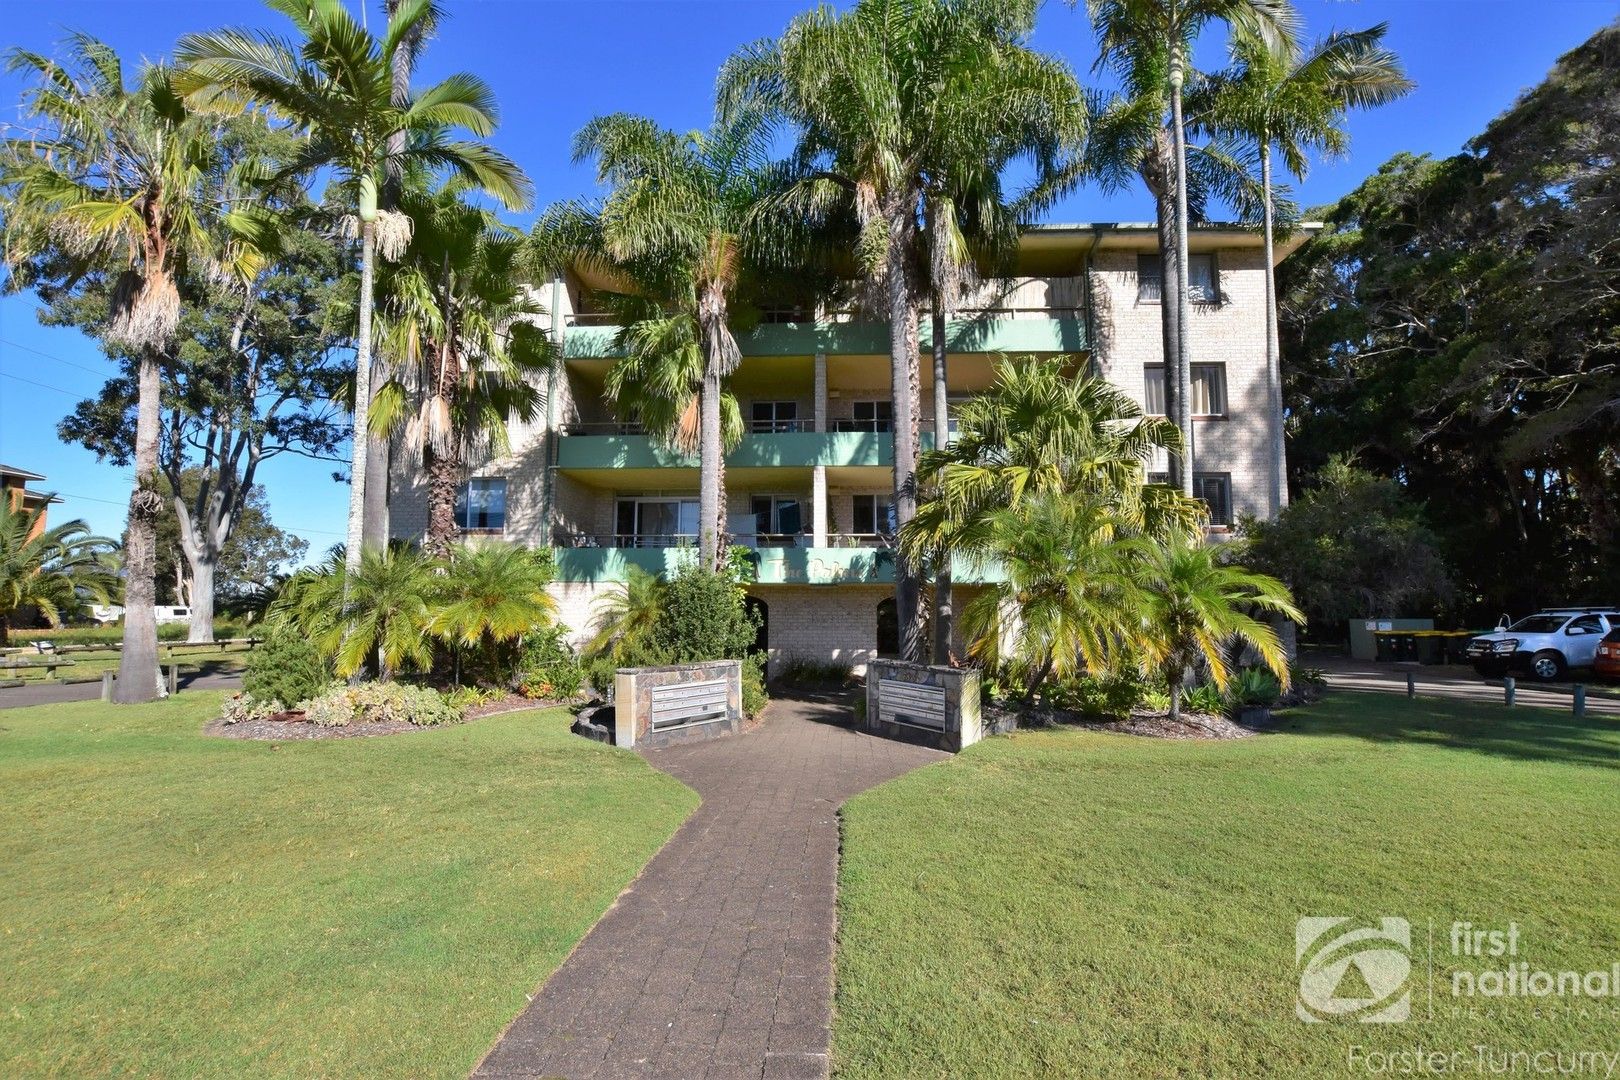 2 bedrooms Apartment / Unit / Flat in 19/28-34 Taree Street TUNCURRY NSW, 2428